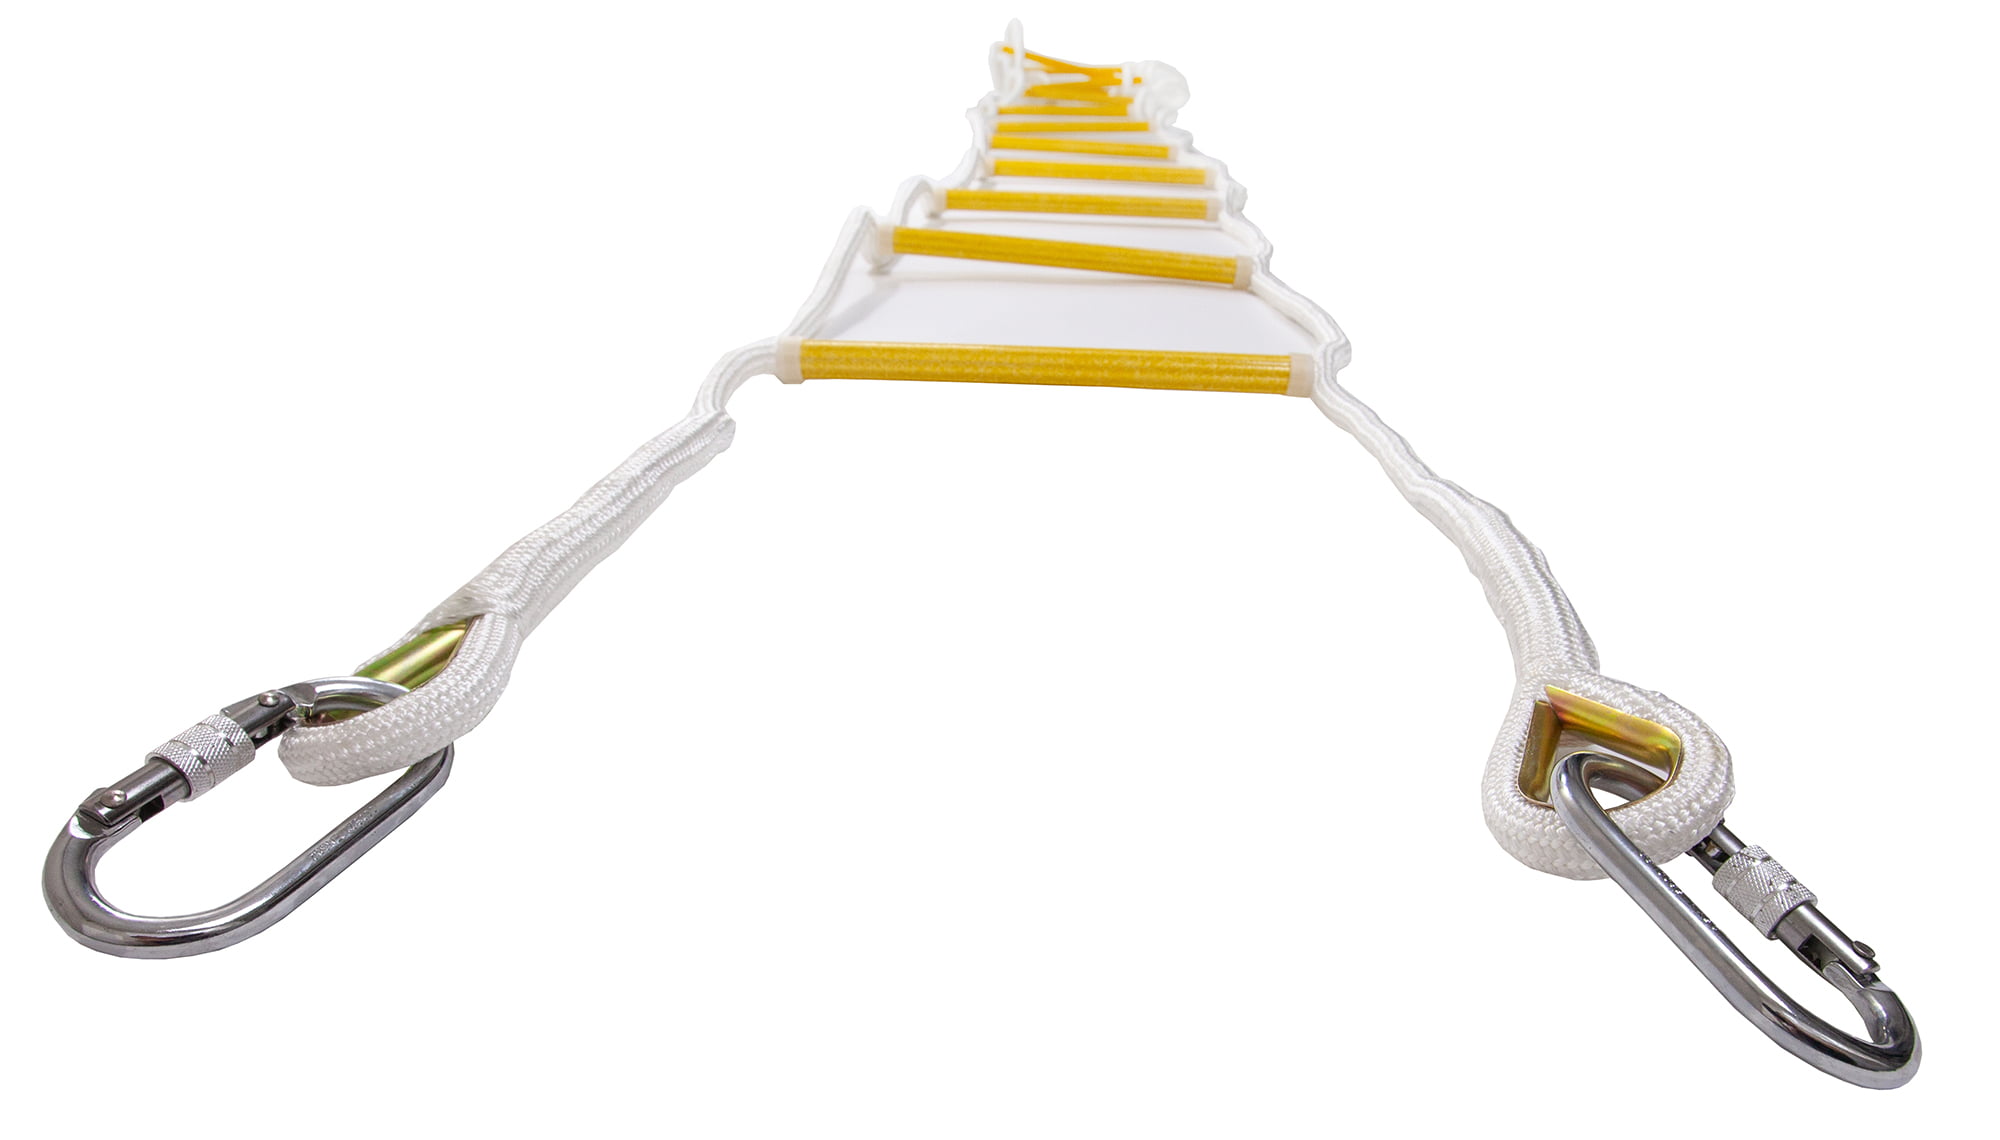 10 m Reusable Flame Resistant Safety Rope Ladder with Carabiners ISOP Emergency Fire Escape Ladder 32 ft Weight Capacity up to 2000 Pounds Safety Cord /& Safety Belt